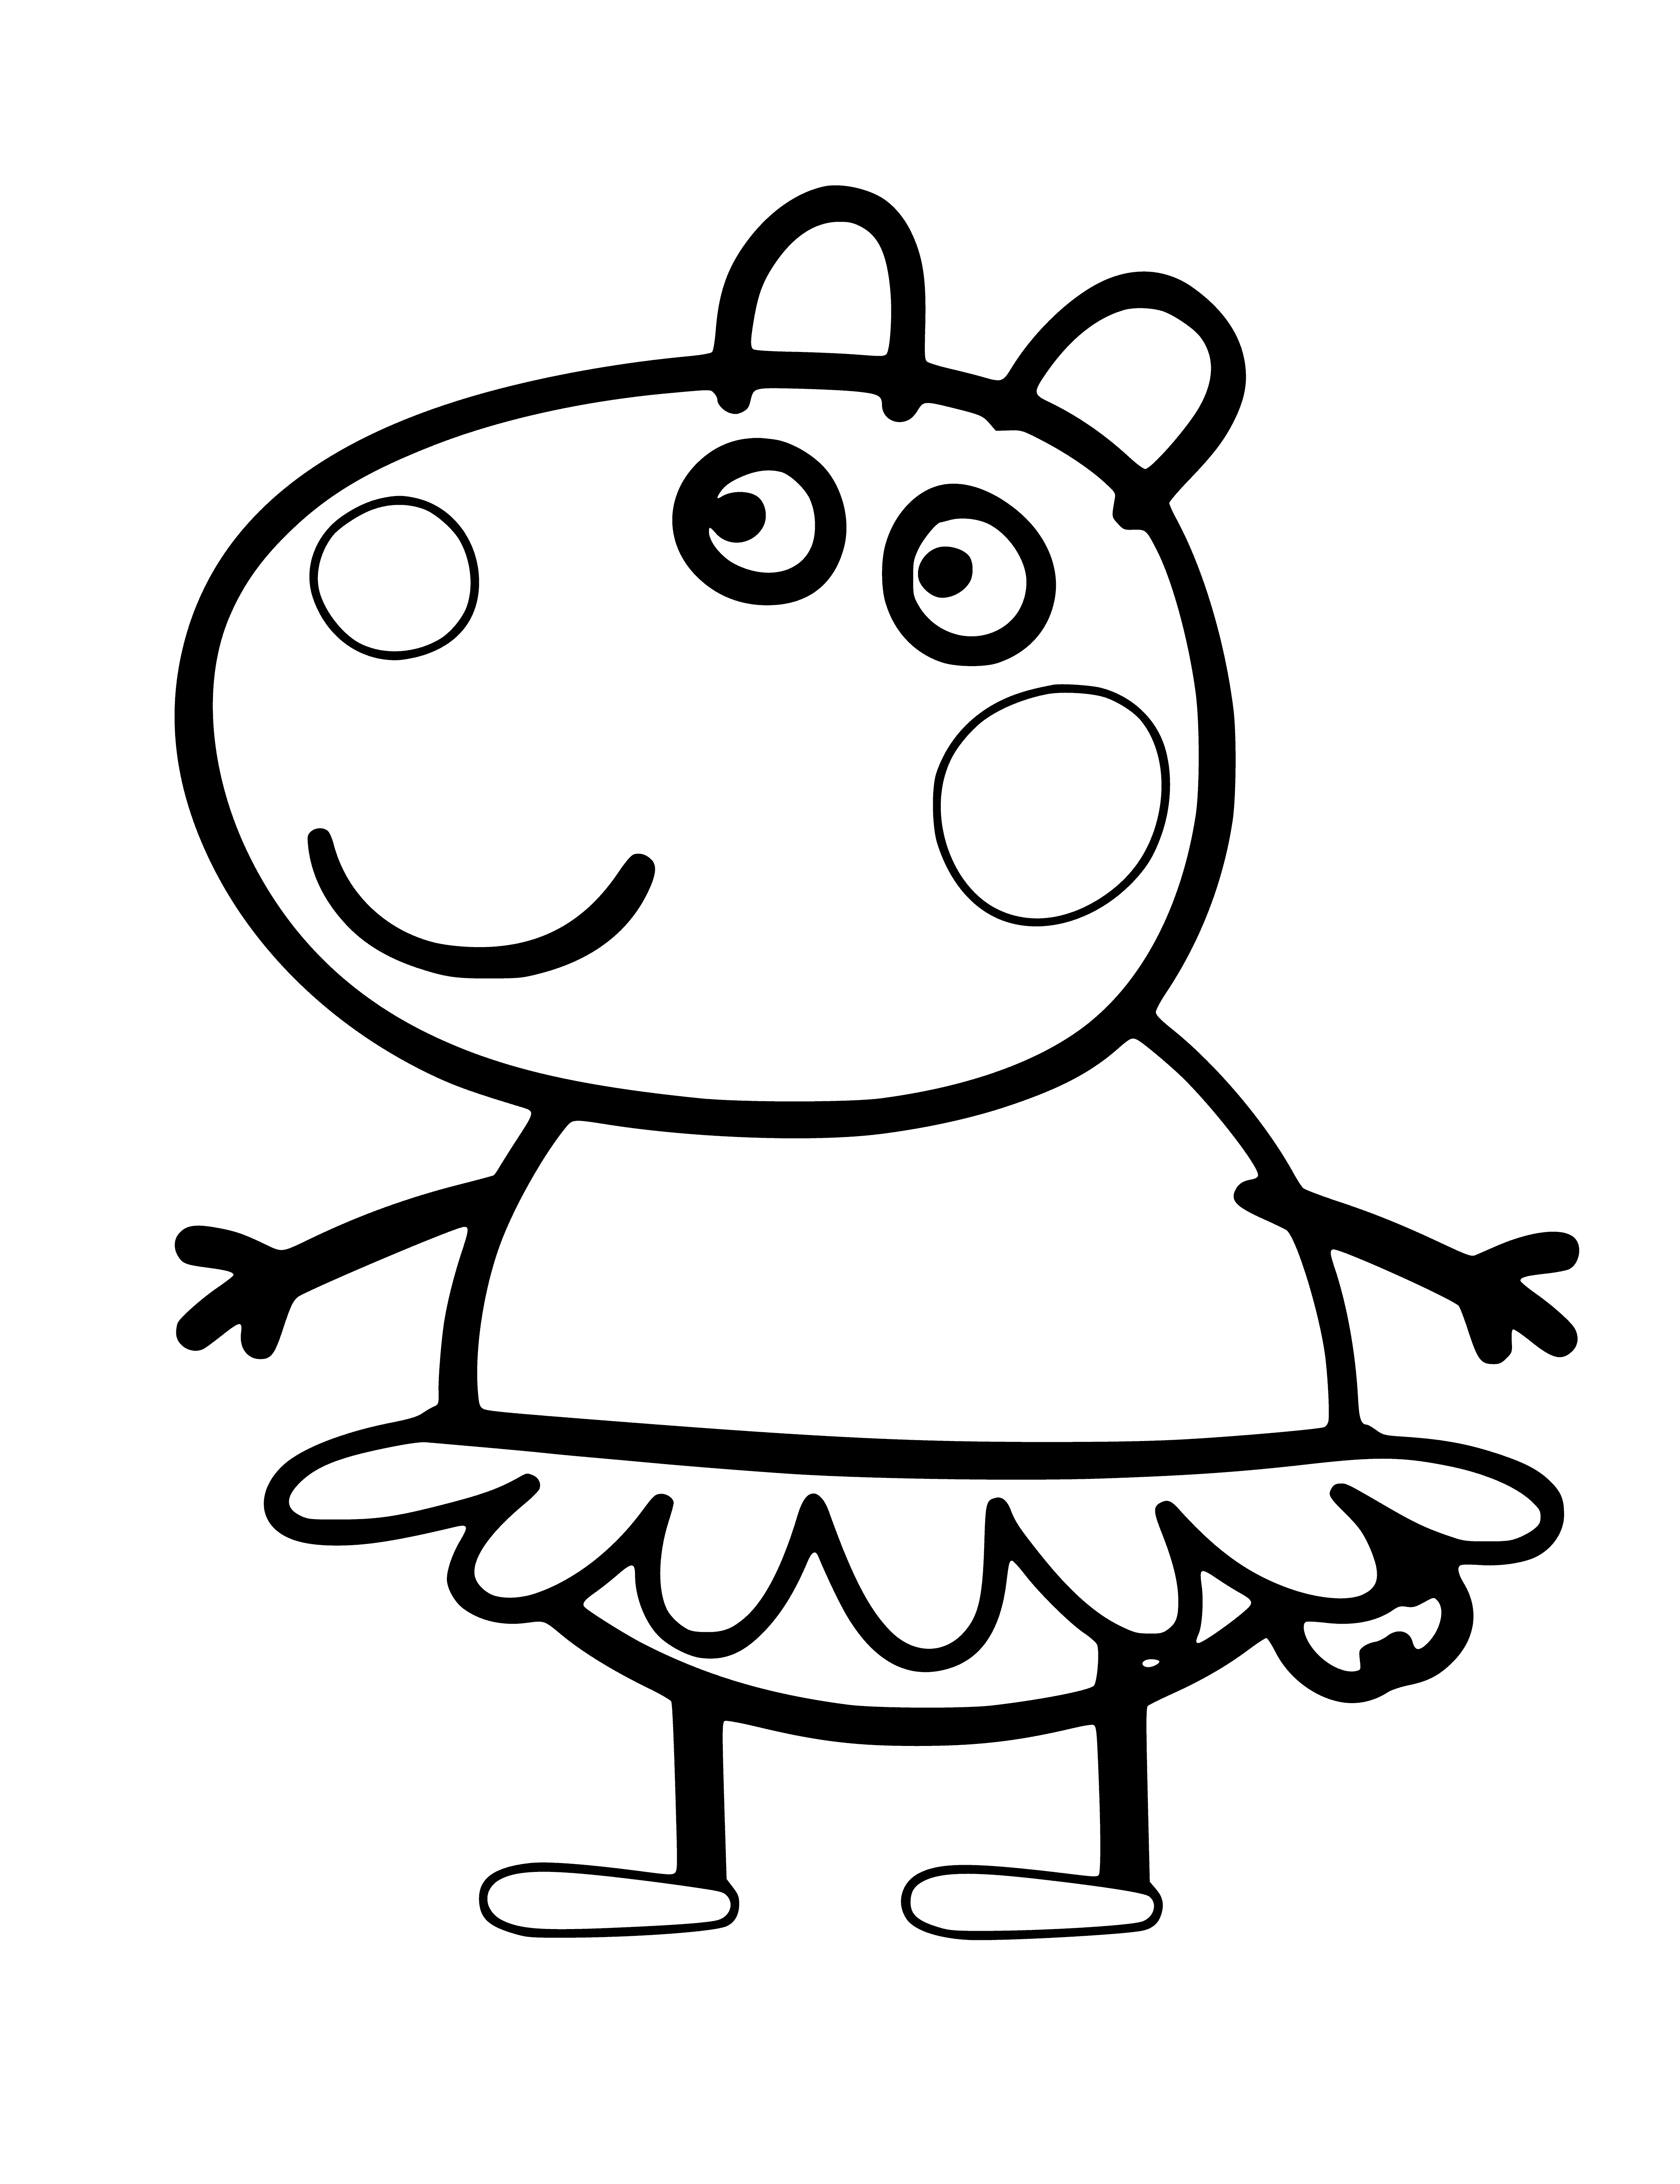 Susie the Sheep coloring page